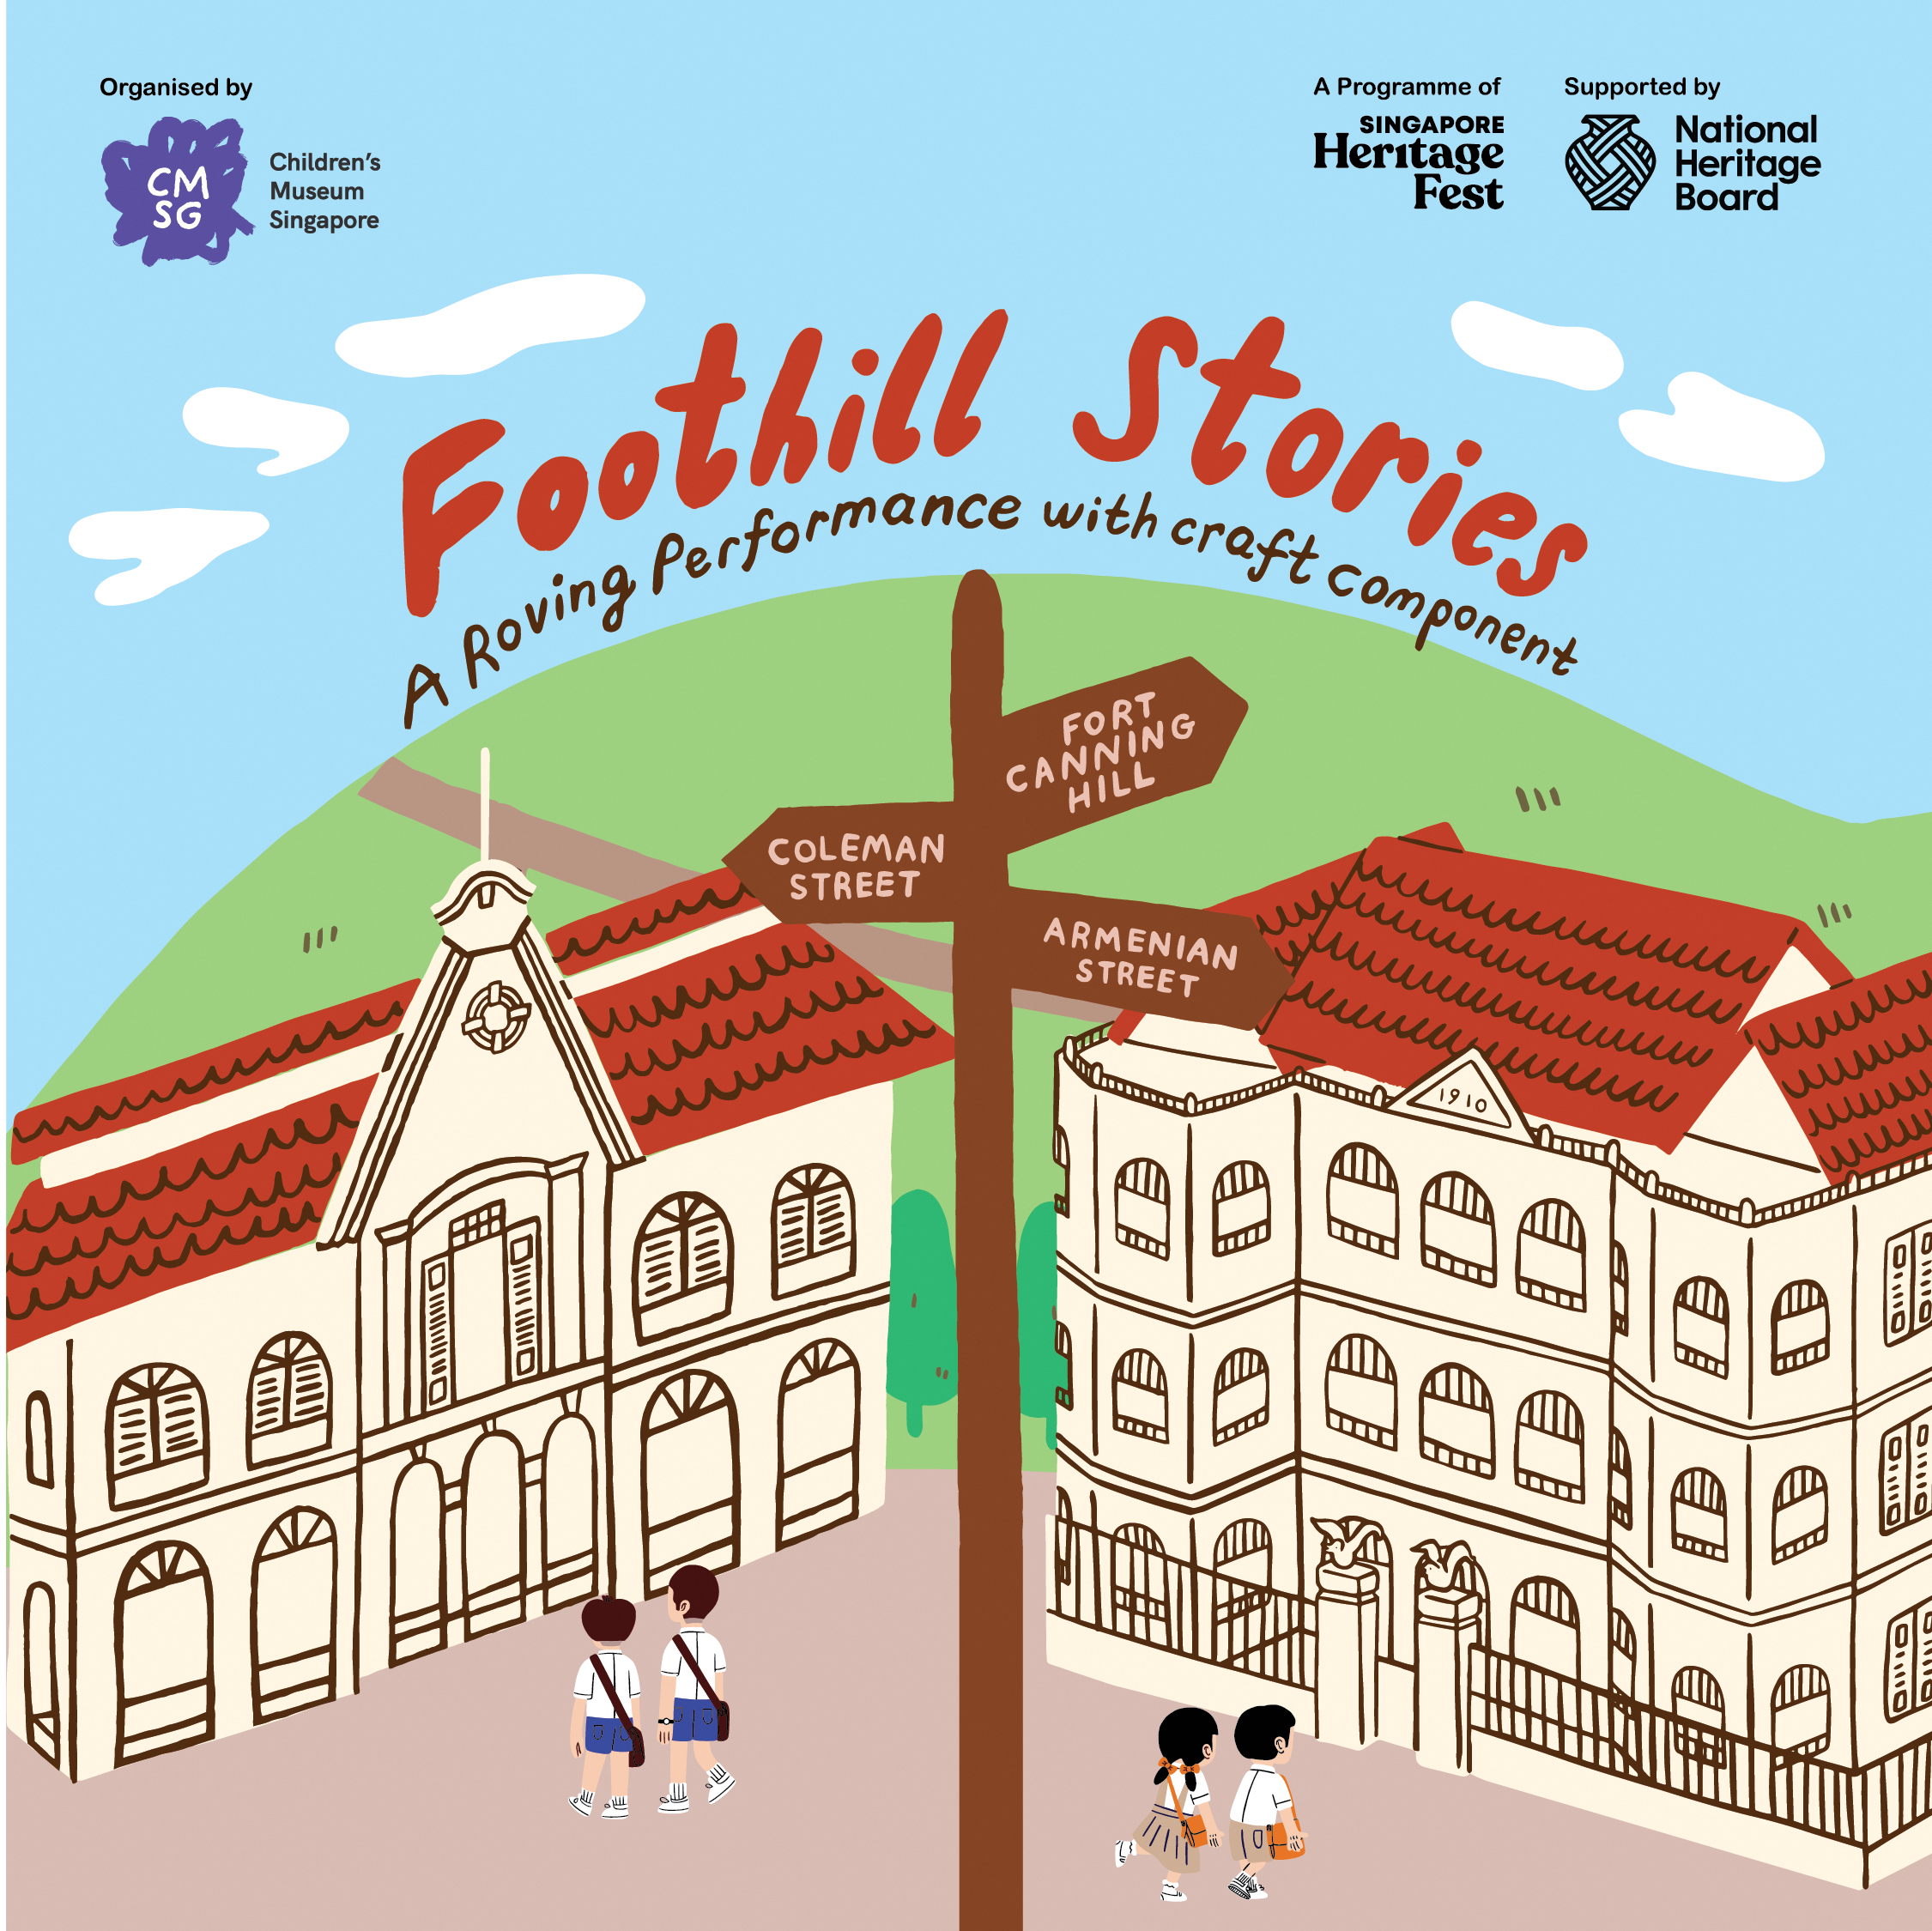 Foothill-Stories---A-Roving-Performance-with-a-Craft-Component